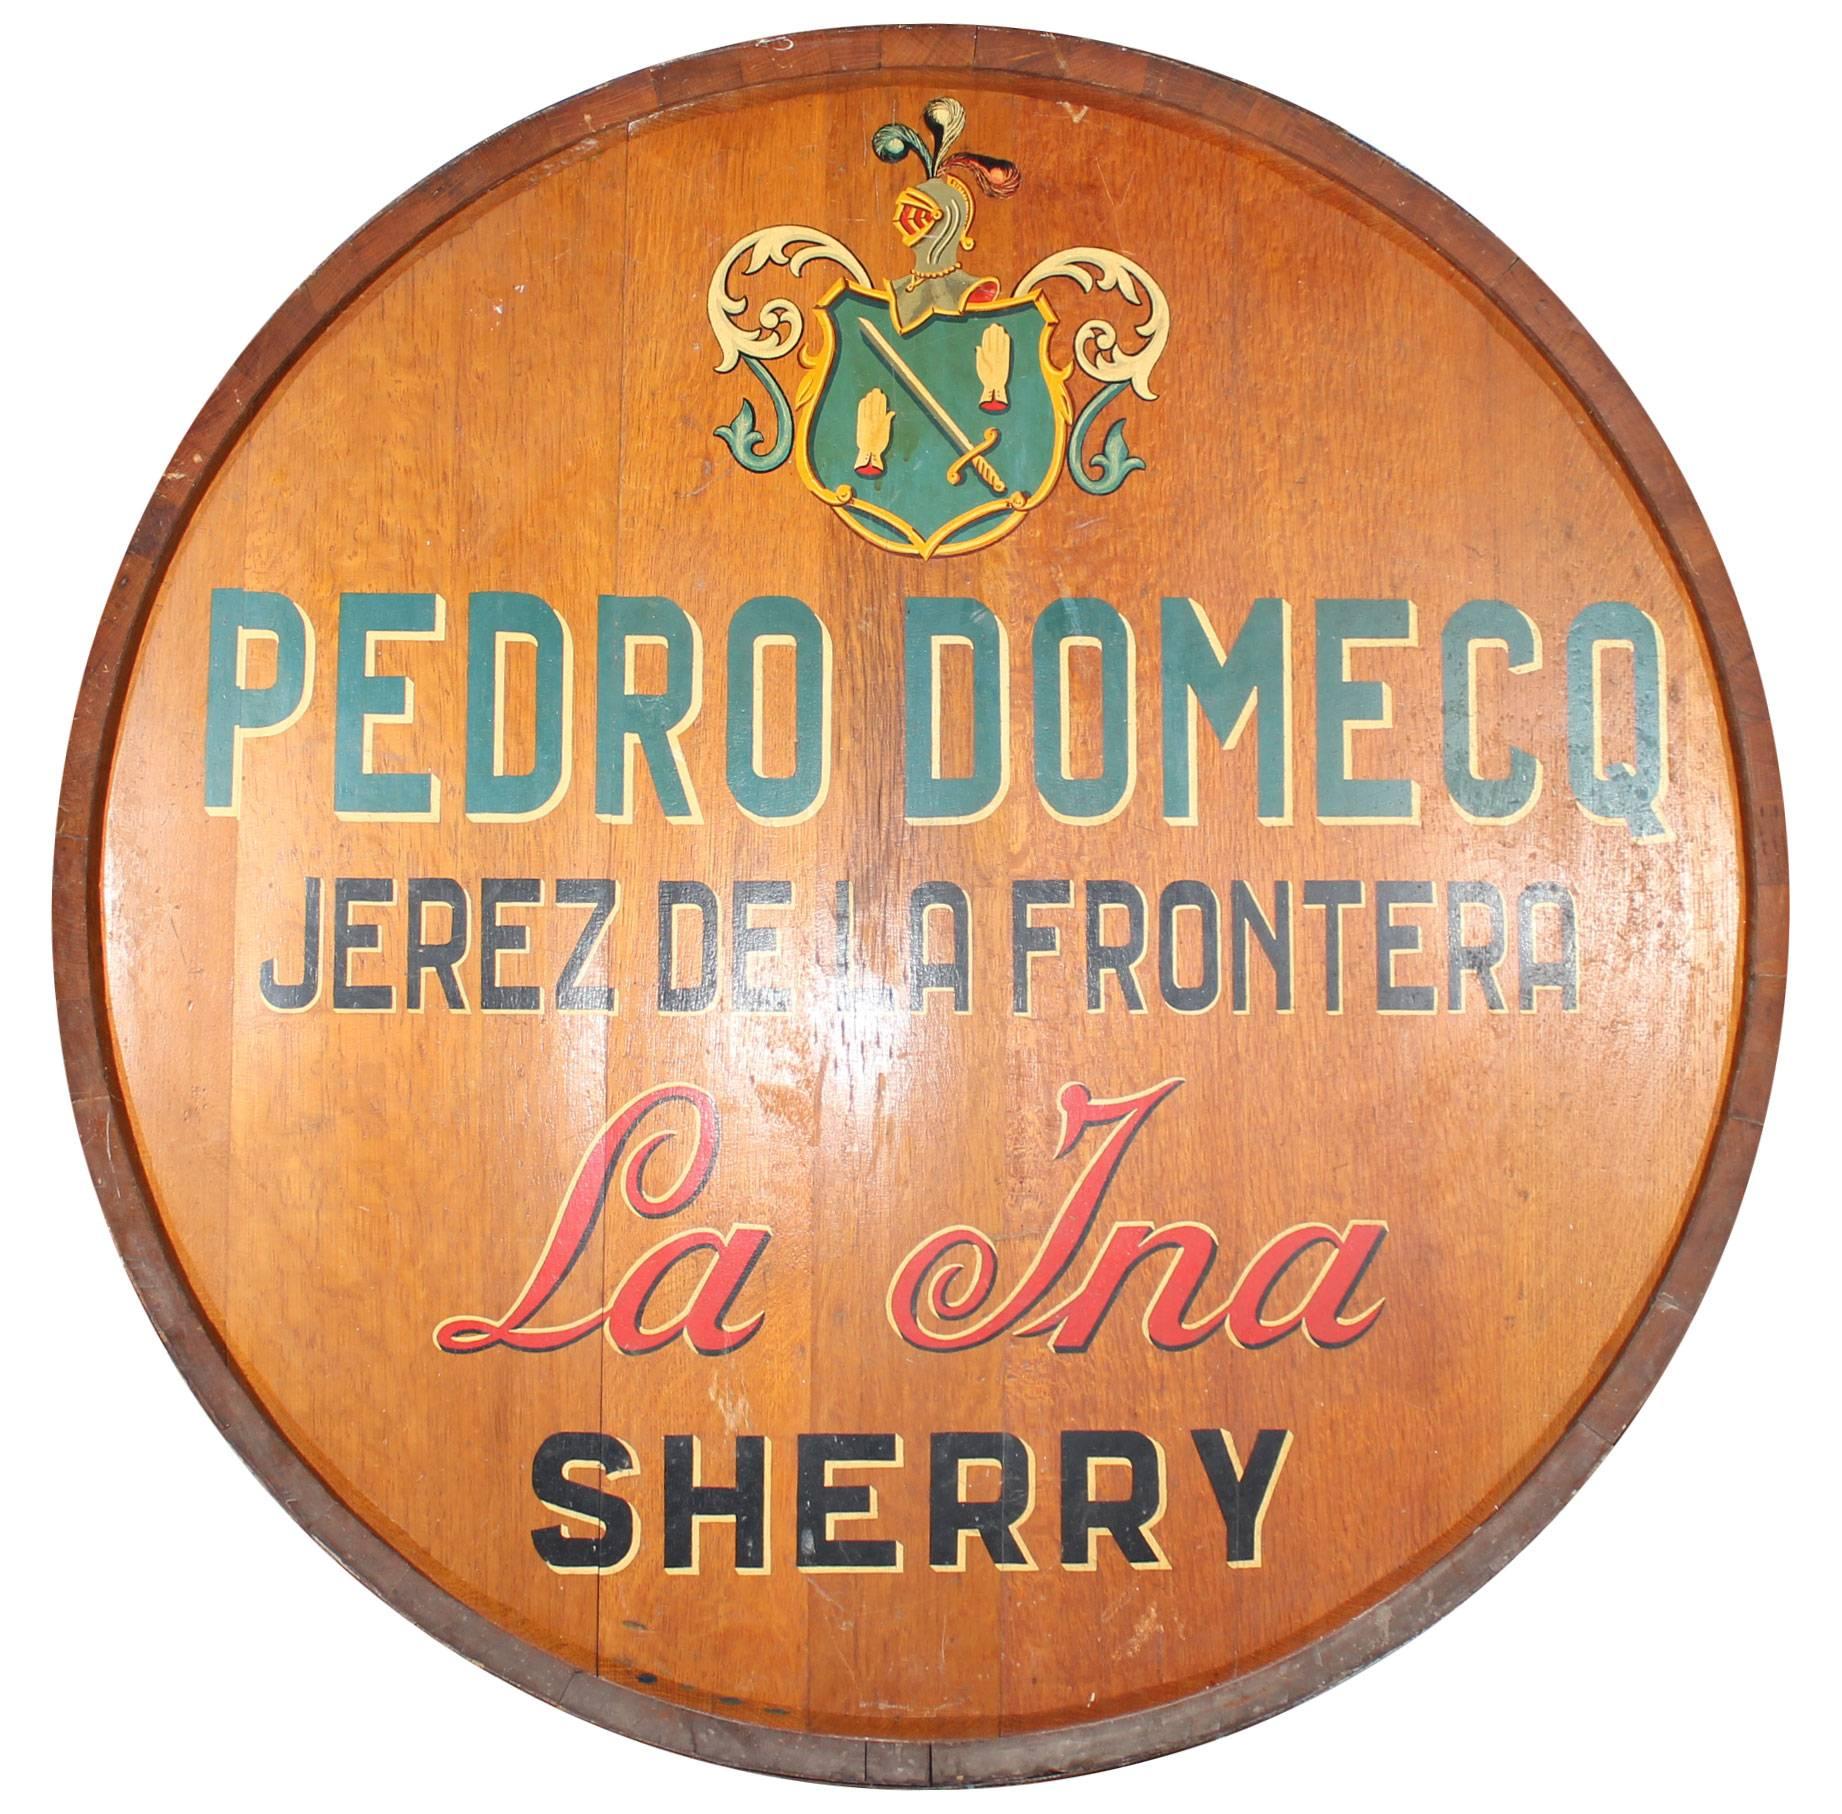 Original wooden casket face, including the iron rings, with hand painted Pedro Domecq sherry winery shield, name, city and the brand, "la Ina", which is still being sold nowadays. Meant to be hung on a wall, the barrel front is perfectly